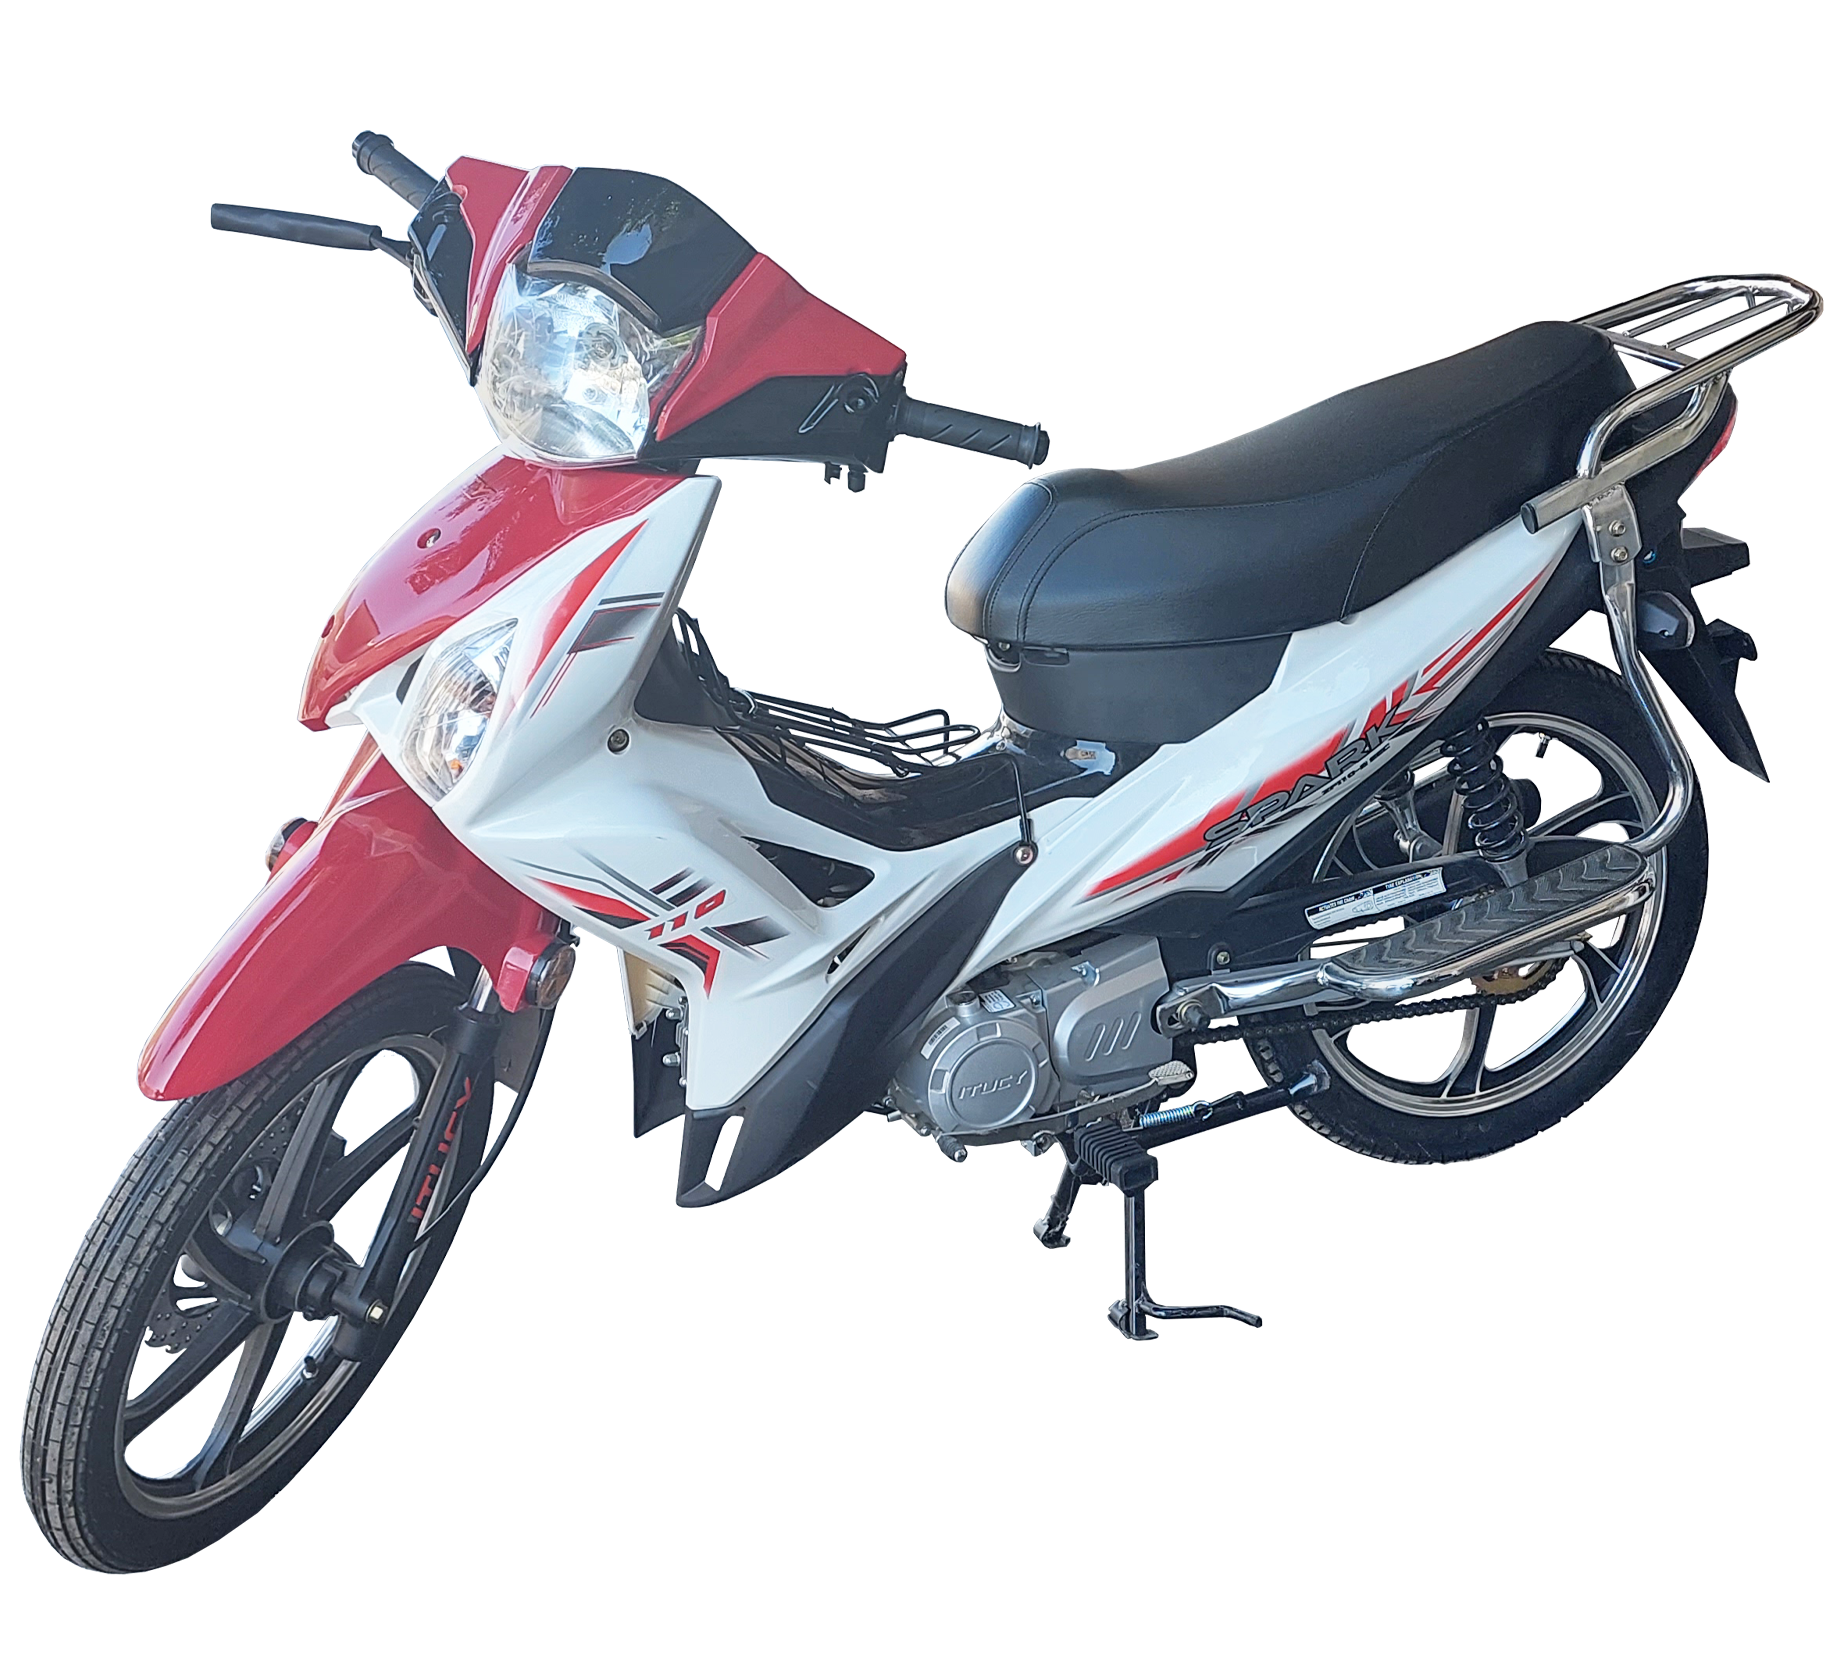 MOTOCYCLE SPARK ZF110 110CC - BLANC / ROUGE ( CARTE GRISE)